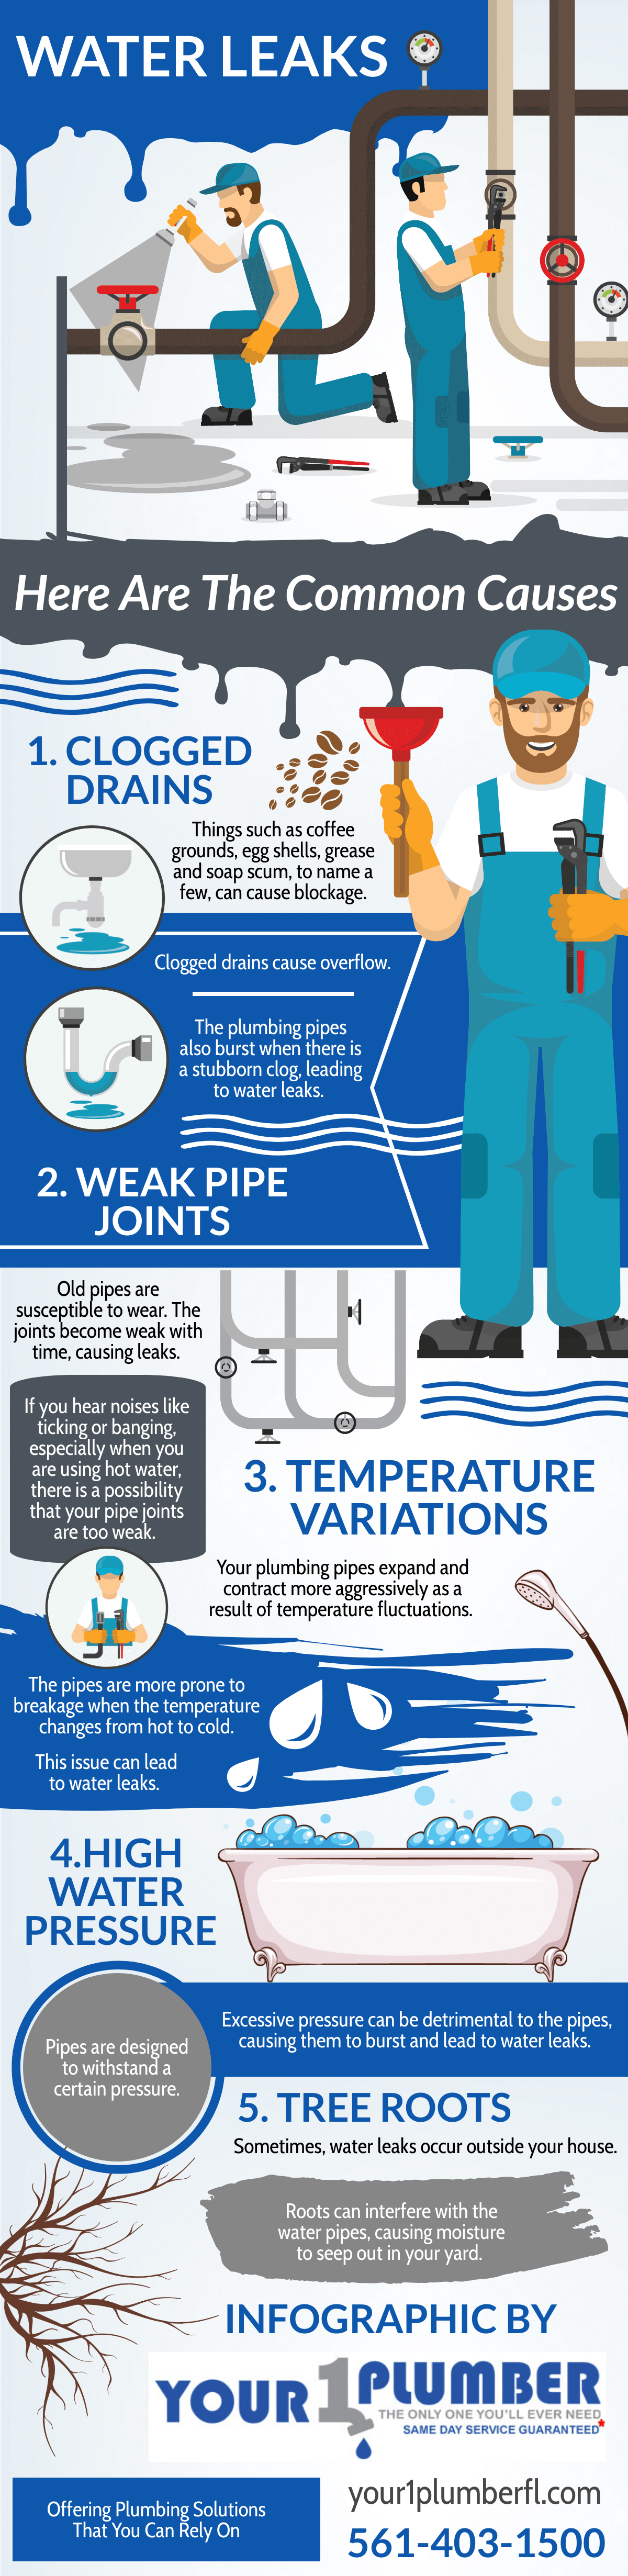 water-leaks-here-are-the-common-causes